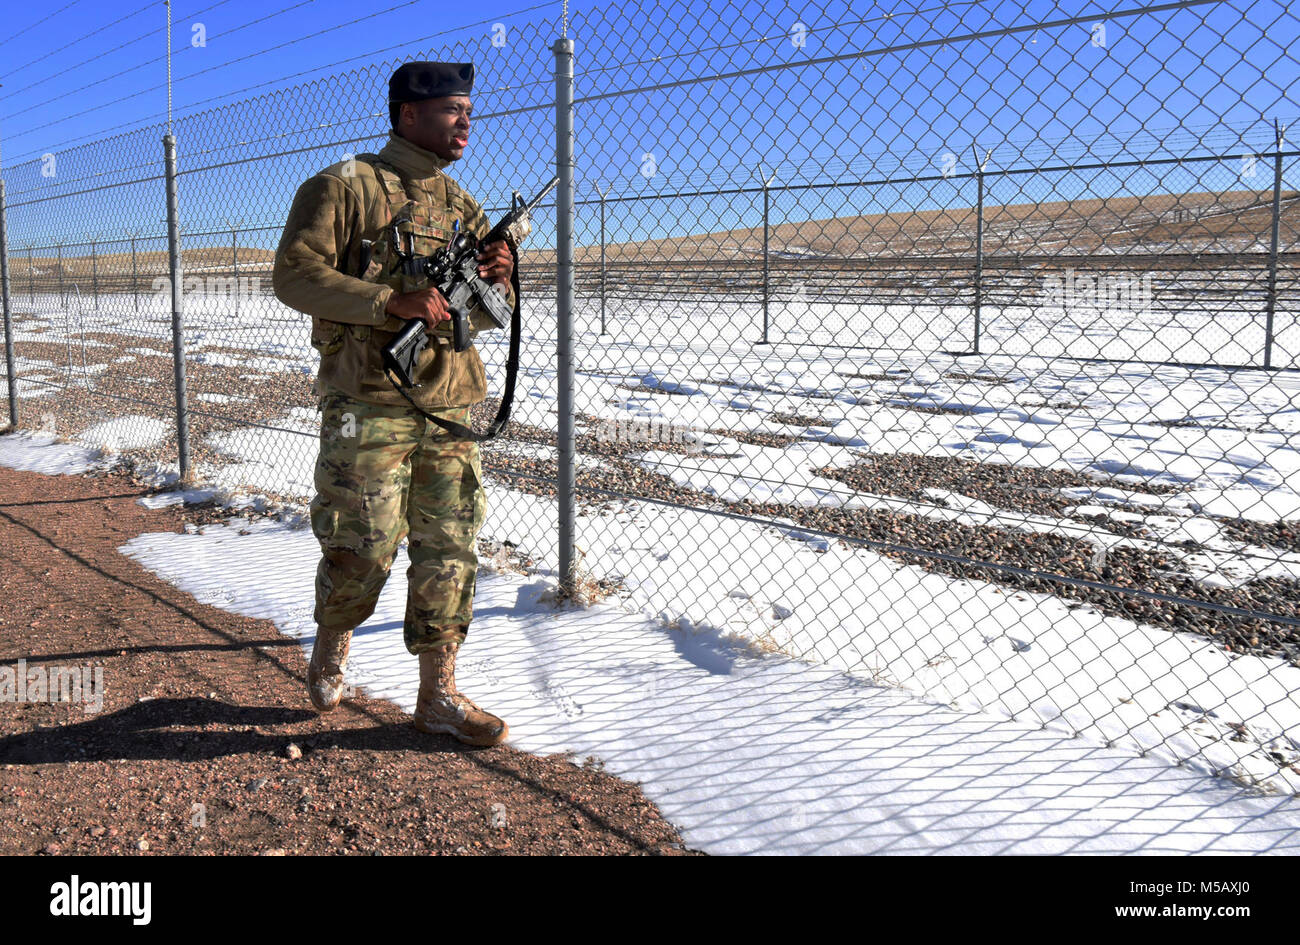 Senior Airman Erik Lewis, 90th Security Forces Squadron alarm monitor, patrols the fence in the weapons storage area at F.E Warren Air Force Base, Wyo., Jan. 26, 2018. Security forces members in the WSA are prepared to respond to threats at any time. (U.S. Air Force Stock Photo